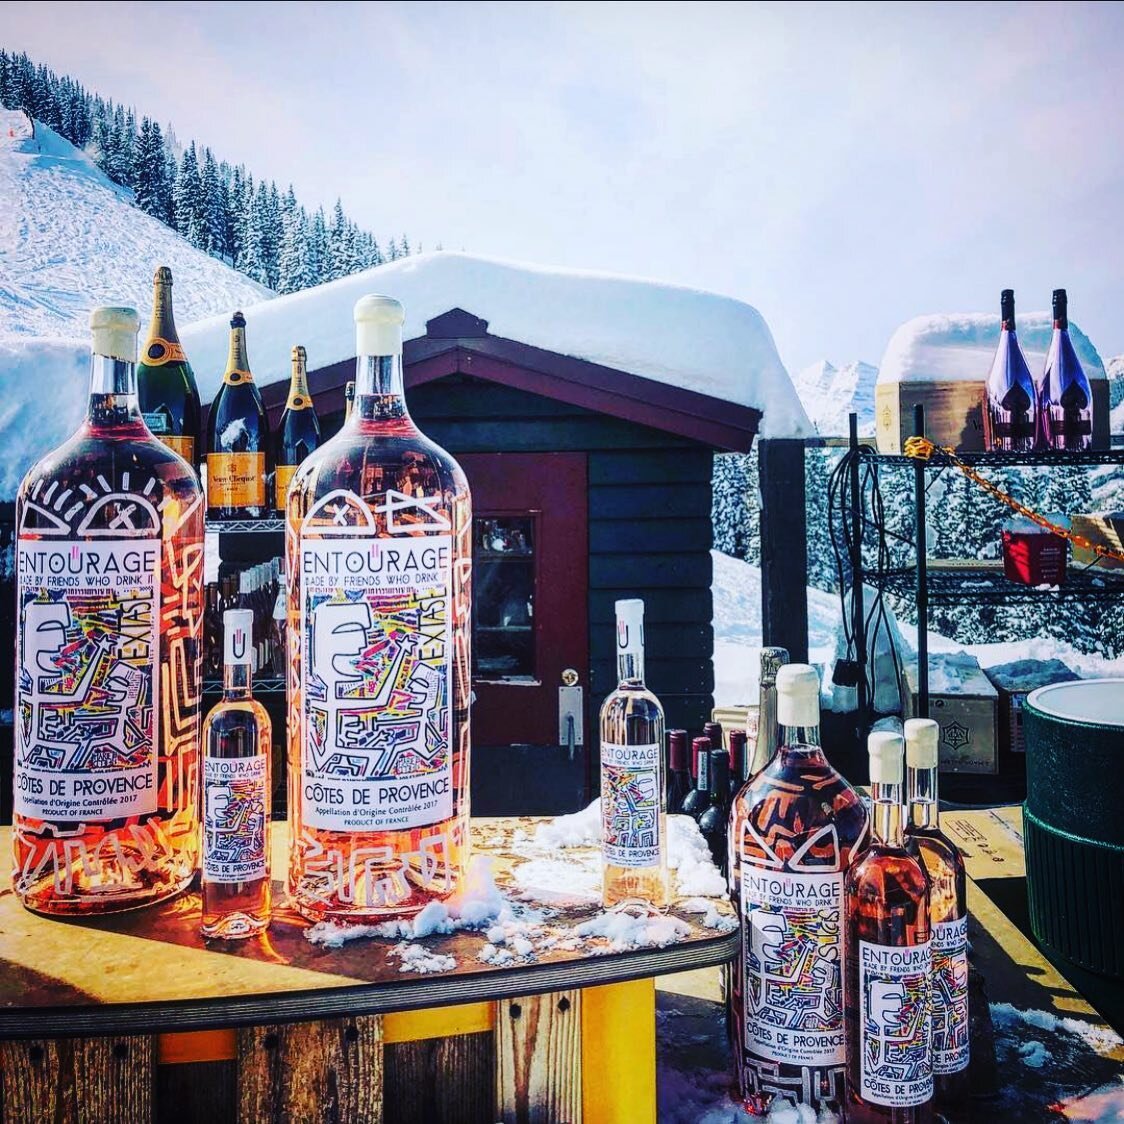 When white snowy sands gets us as thirsty as pink and yellow ones... #aspen #courchevel #megeve #gstaad